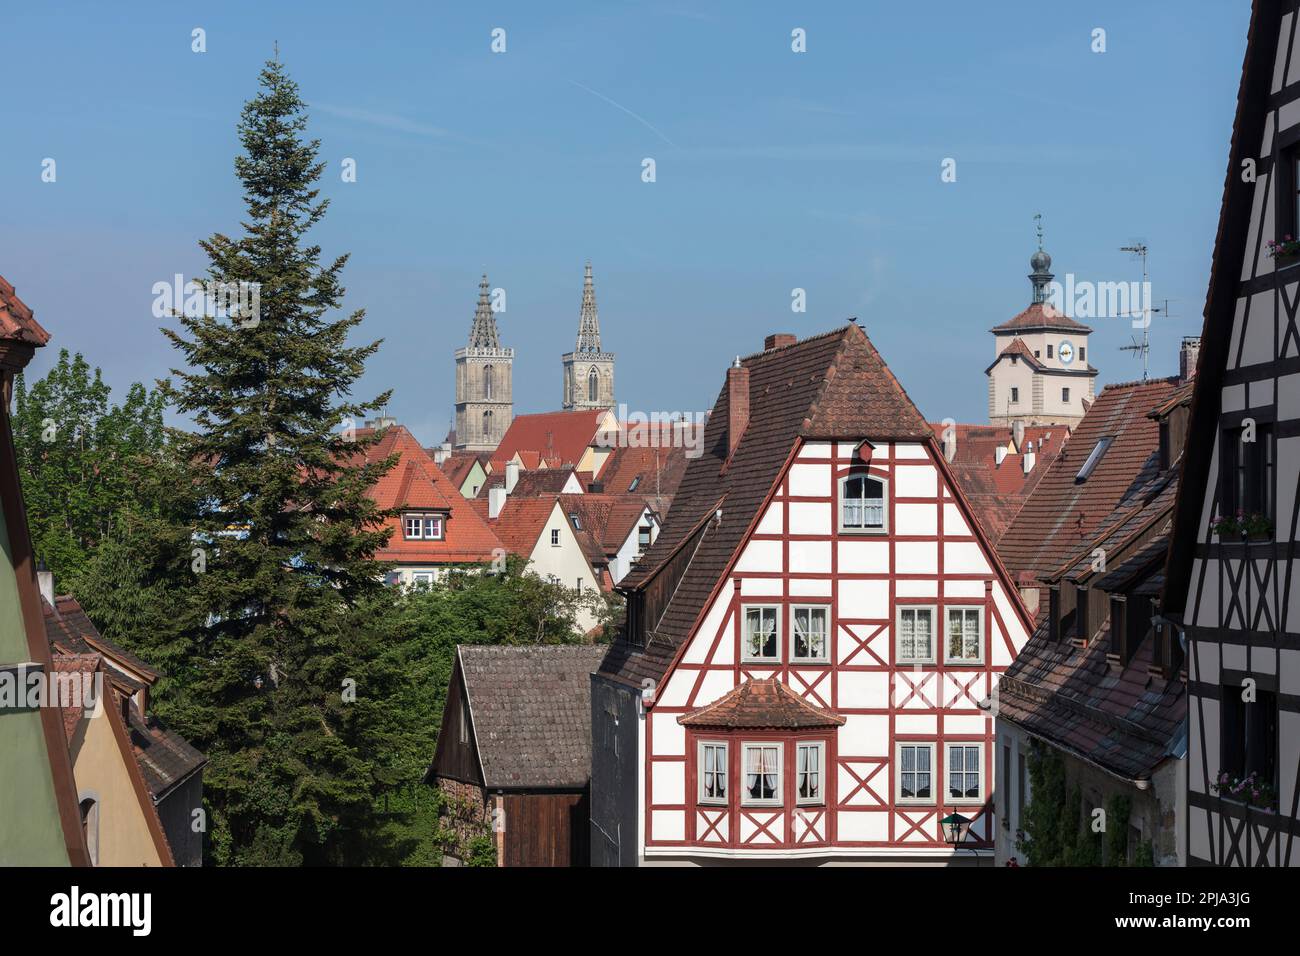 Twin towers of St Jakobs Church and White tower, Weisser Turm above medieval city's historic half timbered buildings Old Town, Altstadt, Rothenburg. Stock Photo